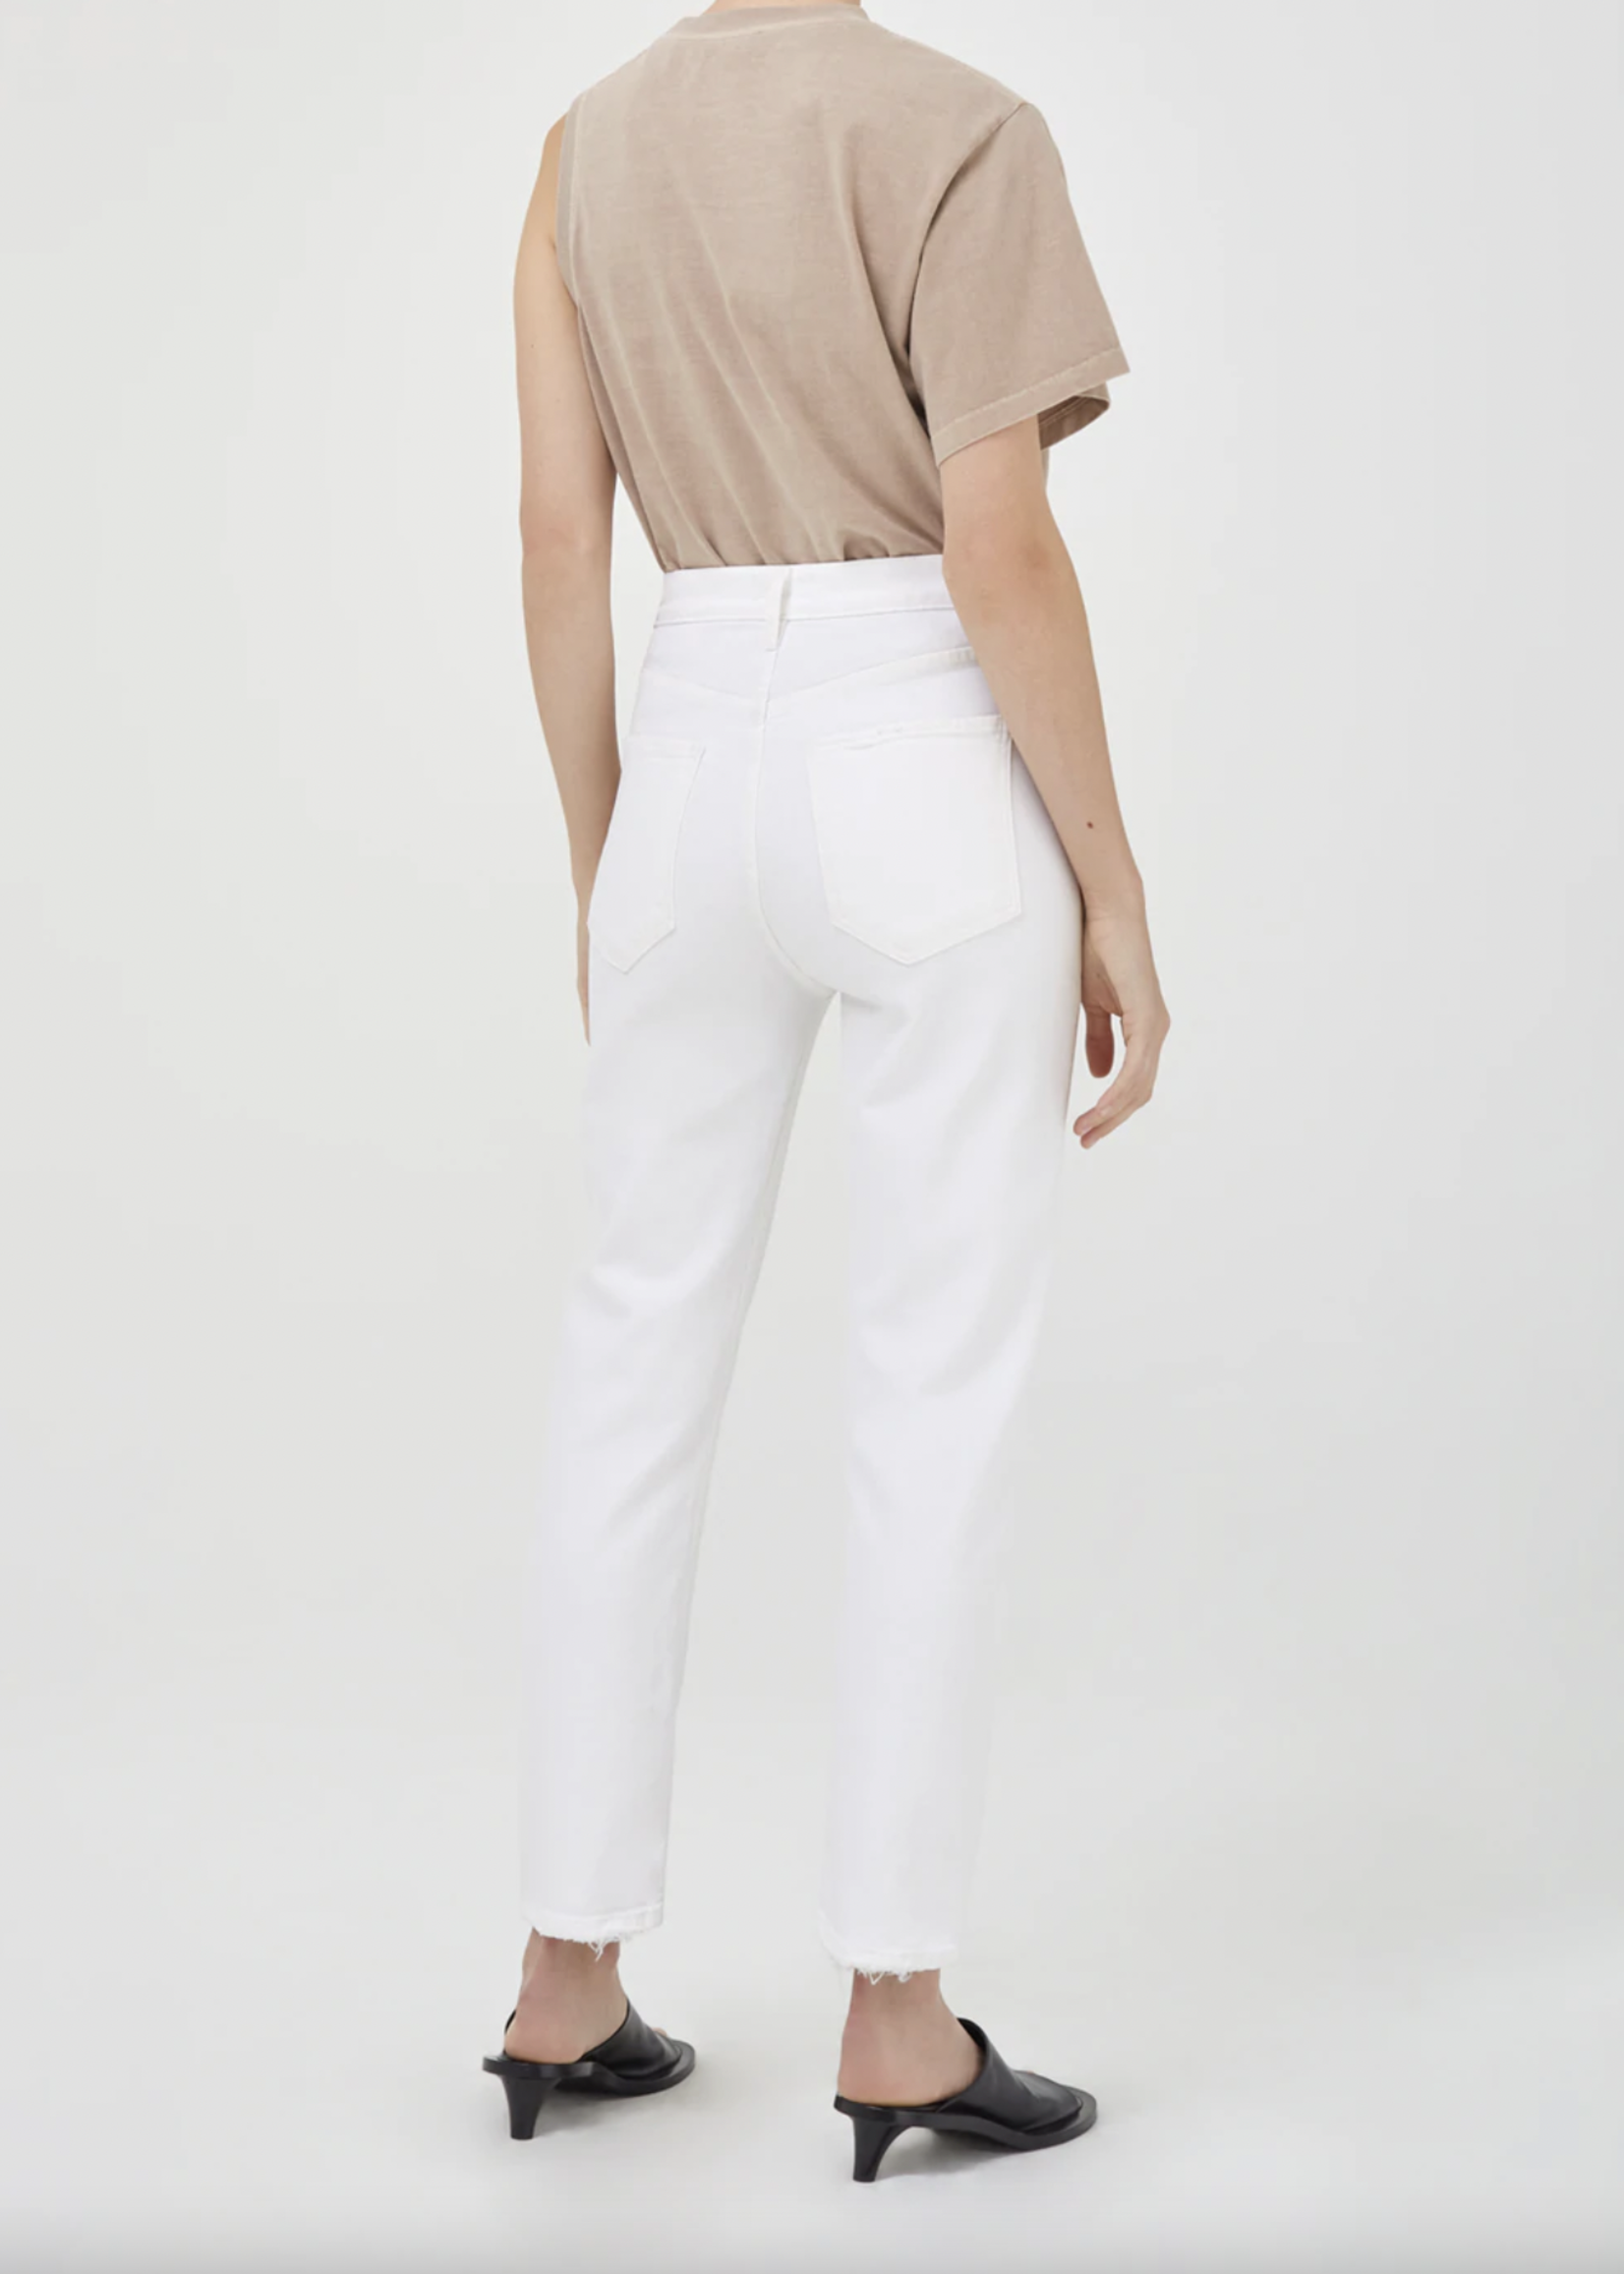 Elitaire Boutique Riley Crop in Whip